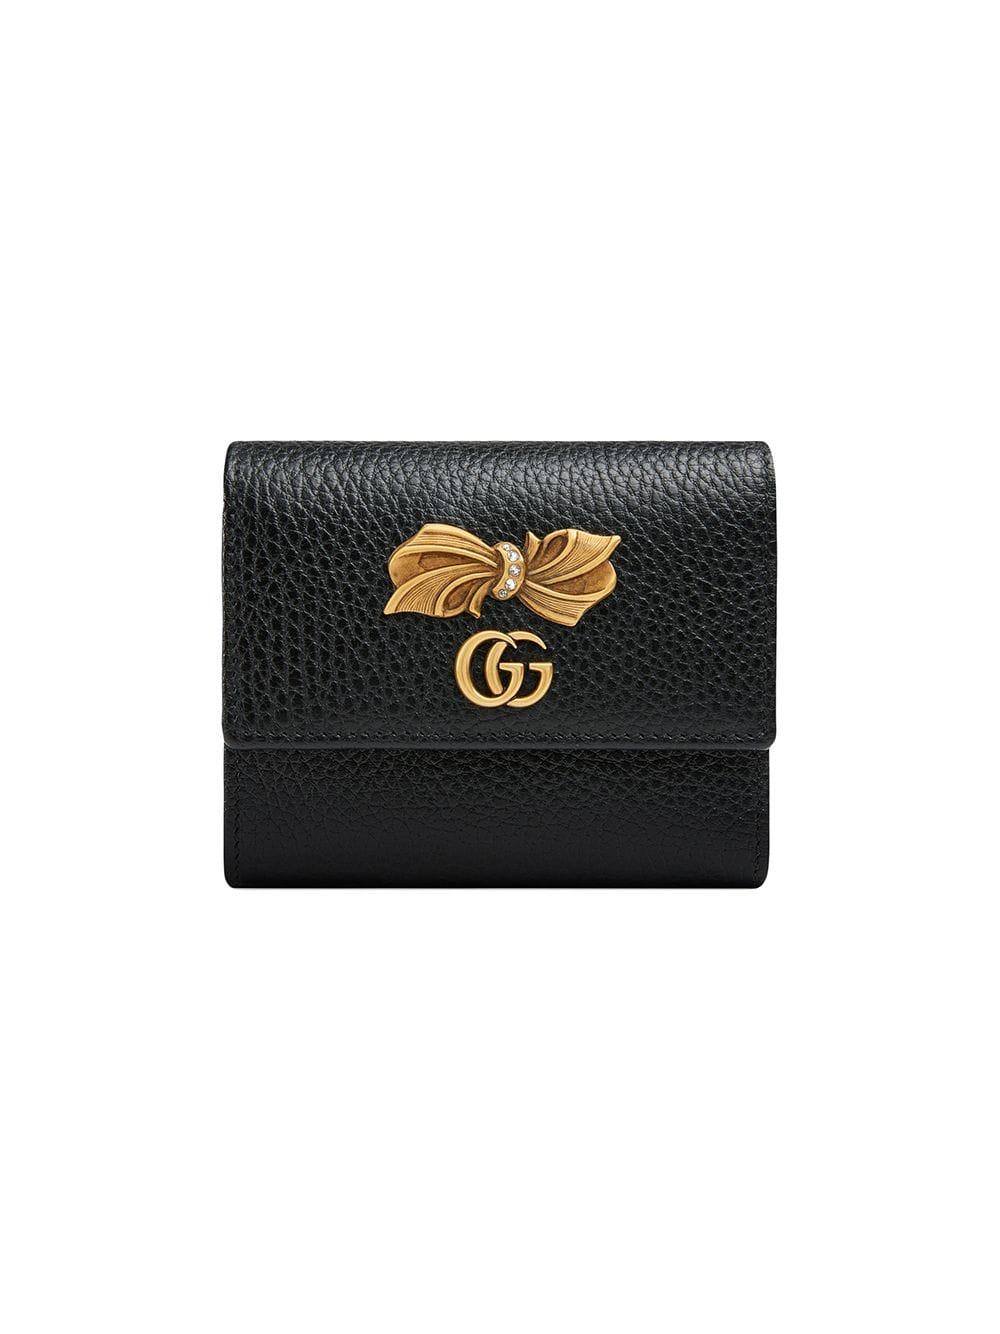 Gucci Leather Wallet With Bow in Black 